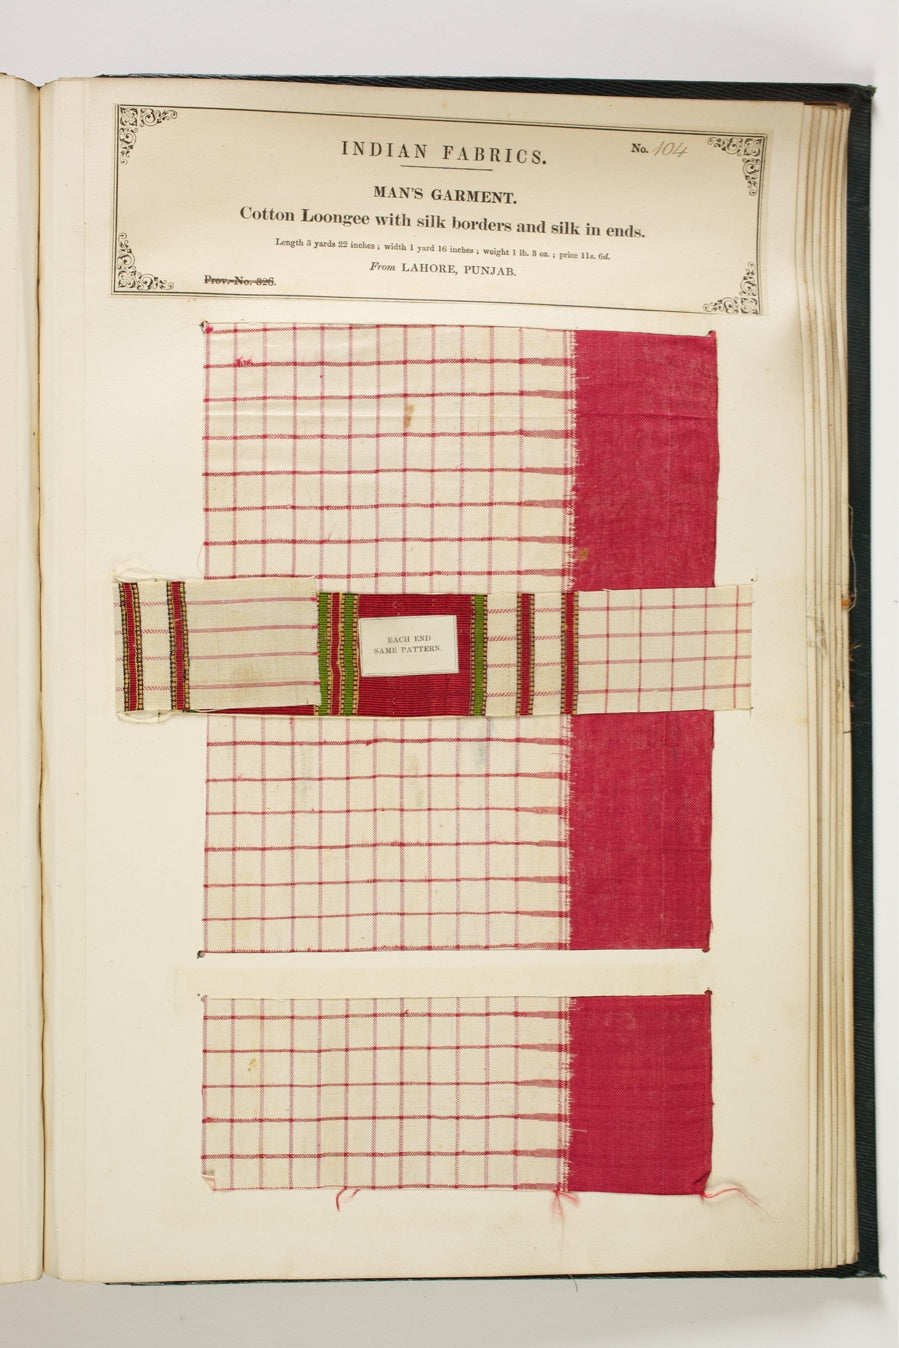 ‘The Textile Manufactures and the Costumes of The People of India’ by Dr. John Forbes Watson.